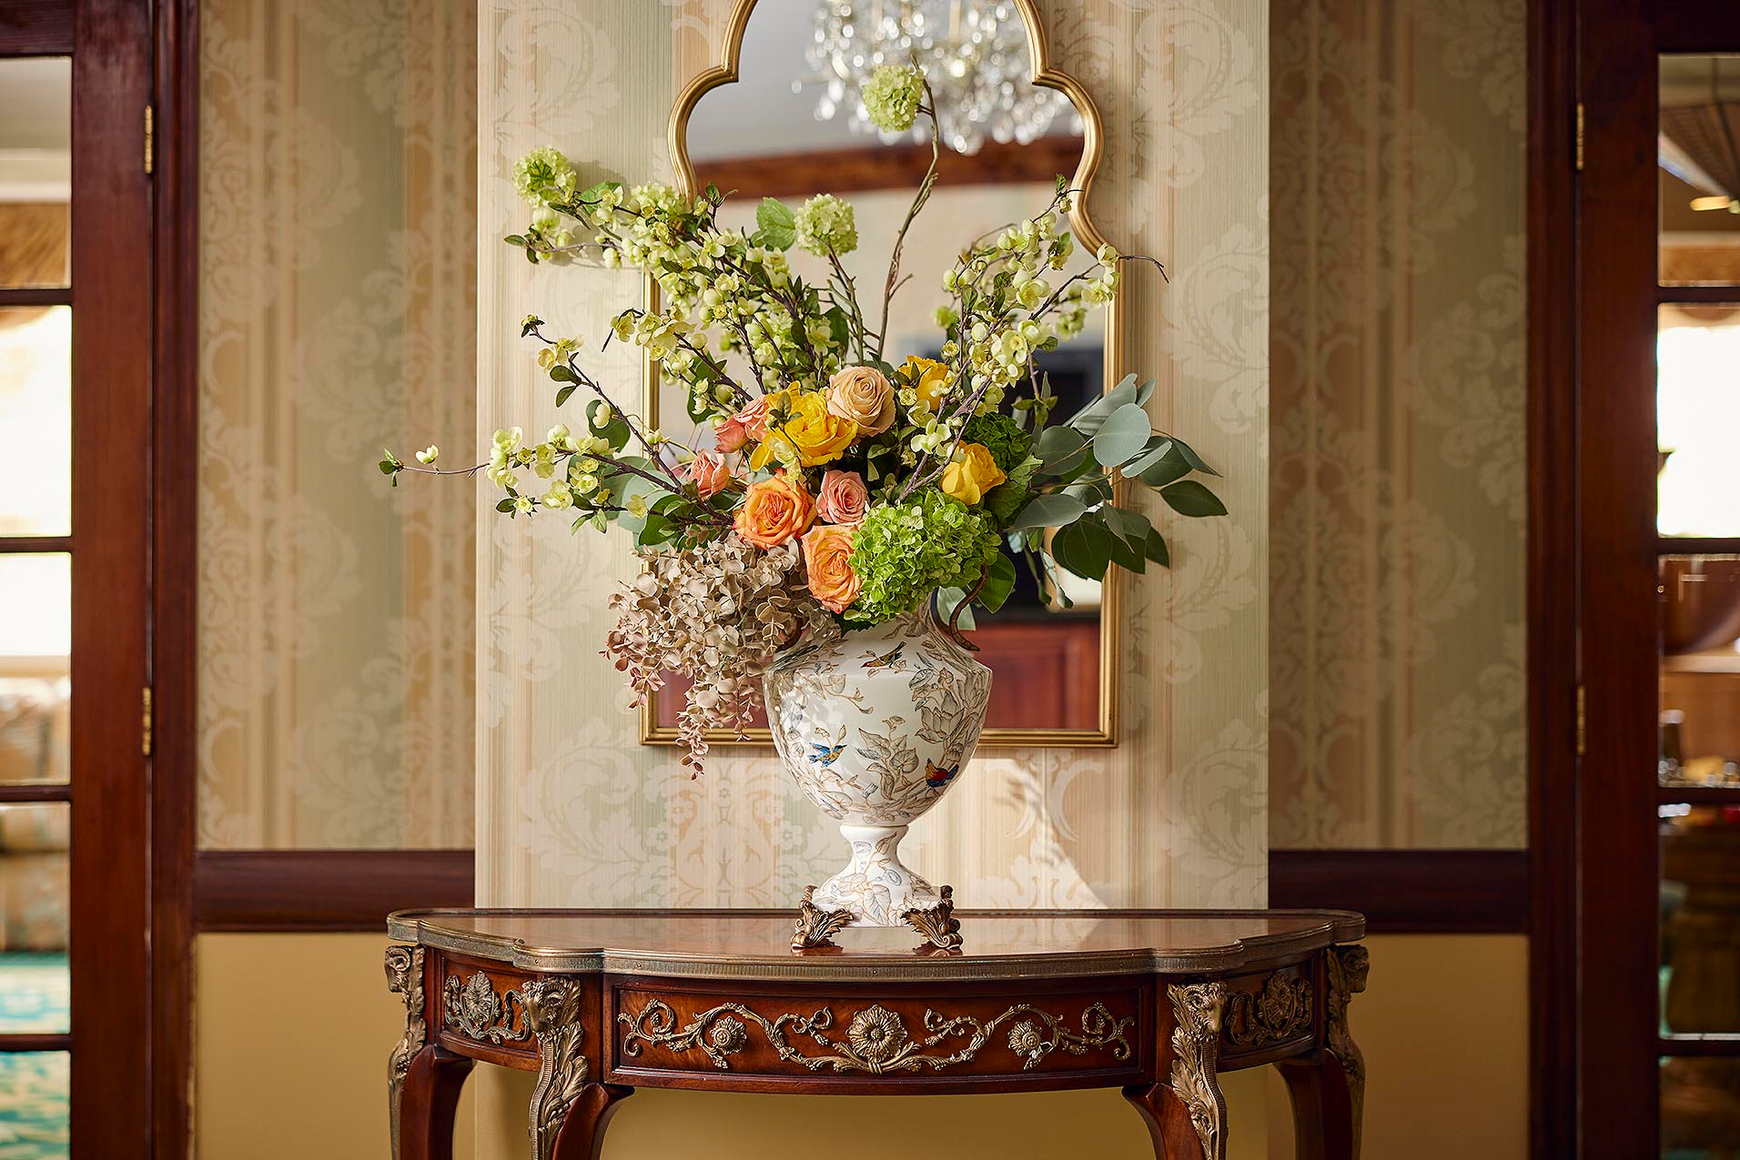 Roses and hydrangeas in a large vase